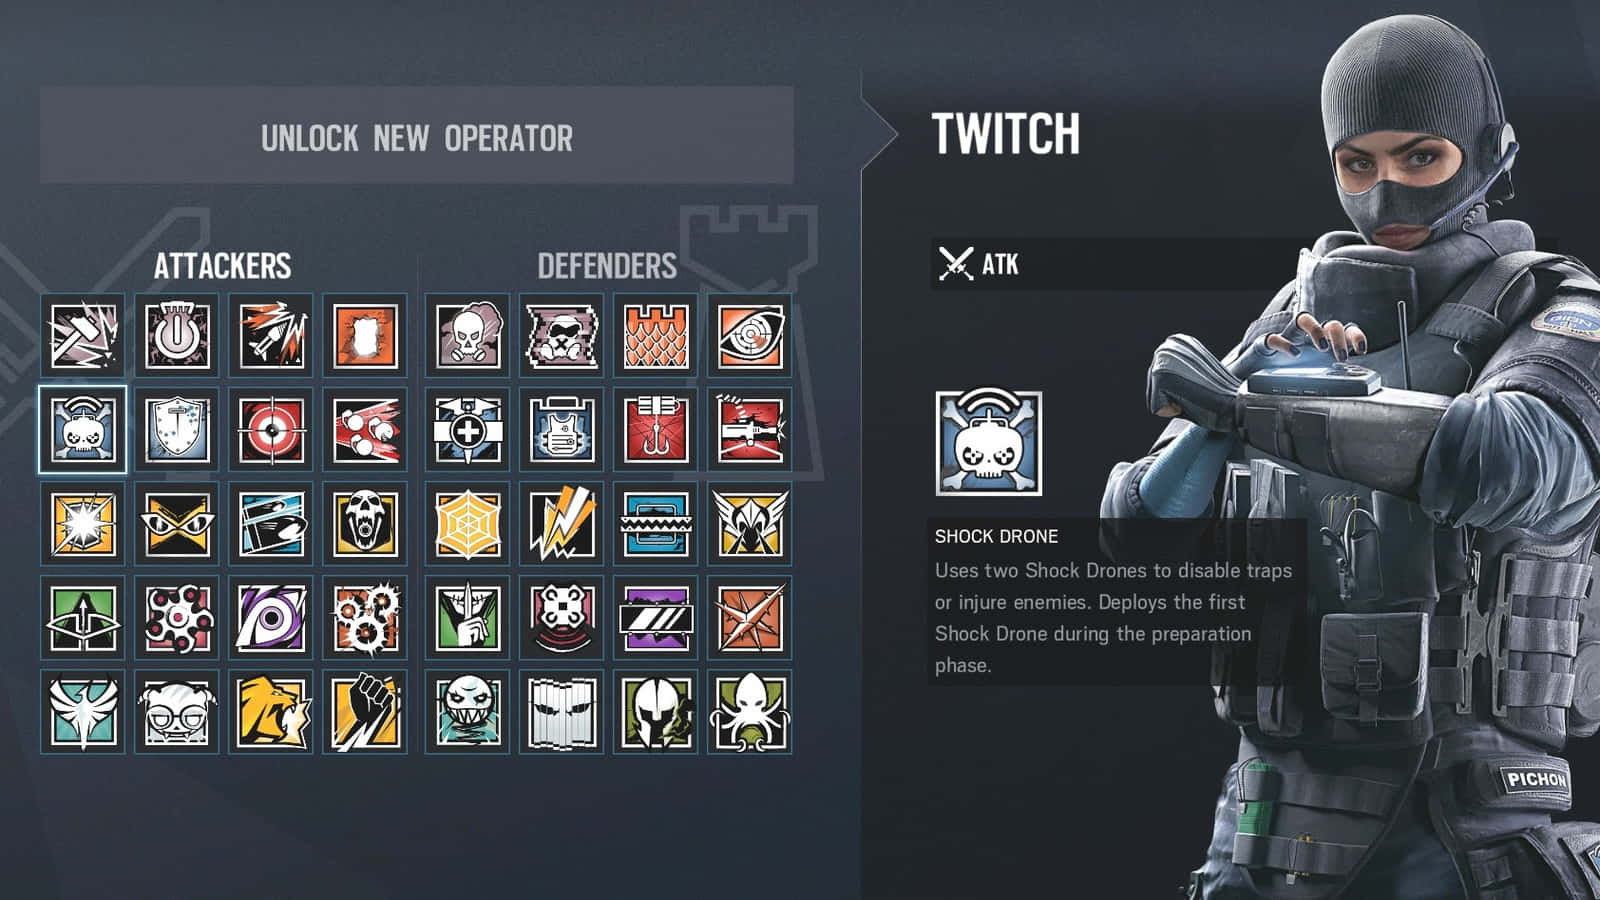 Twitch Operator in Action on Rainbow Six Siege Wallpaper